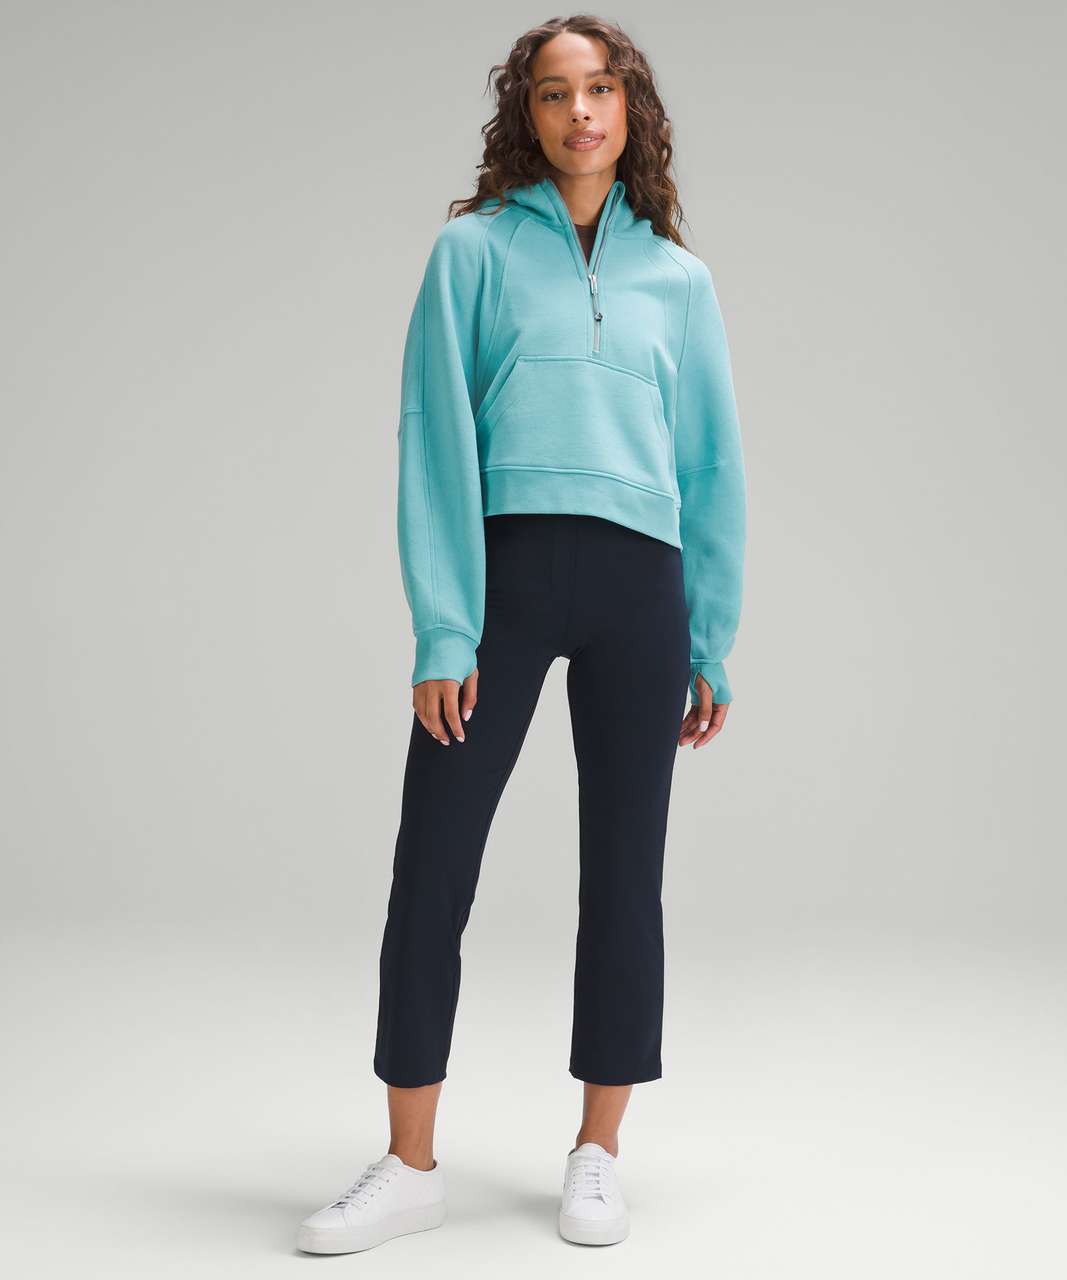 Lululemon Smooth Fit Pull-On High-Rise Cropped Pant. Utility Blue